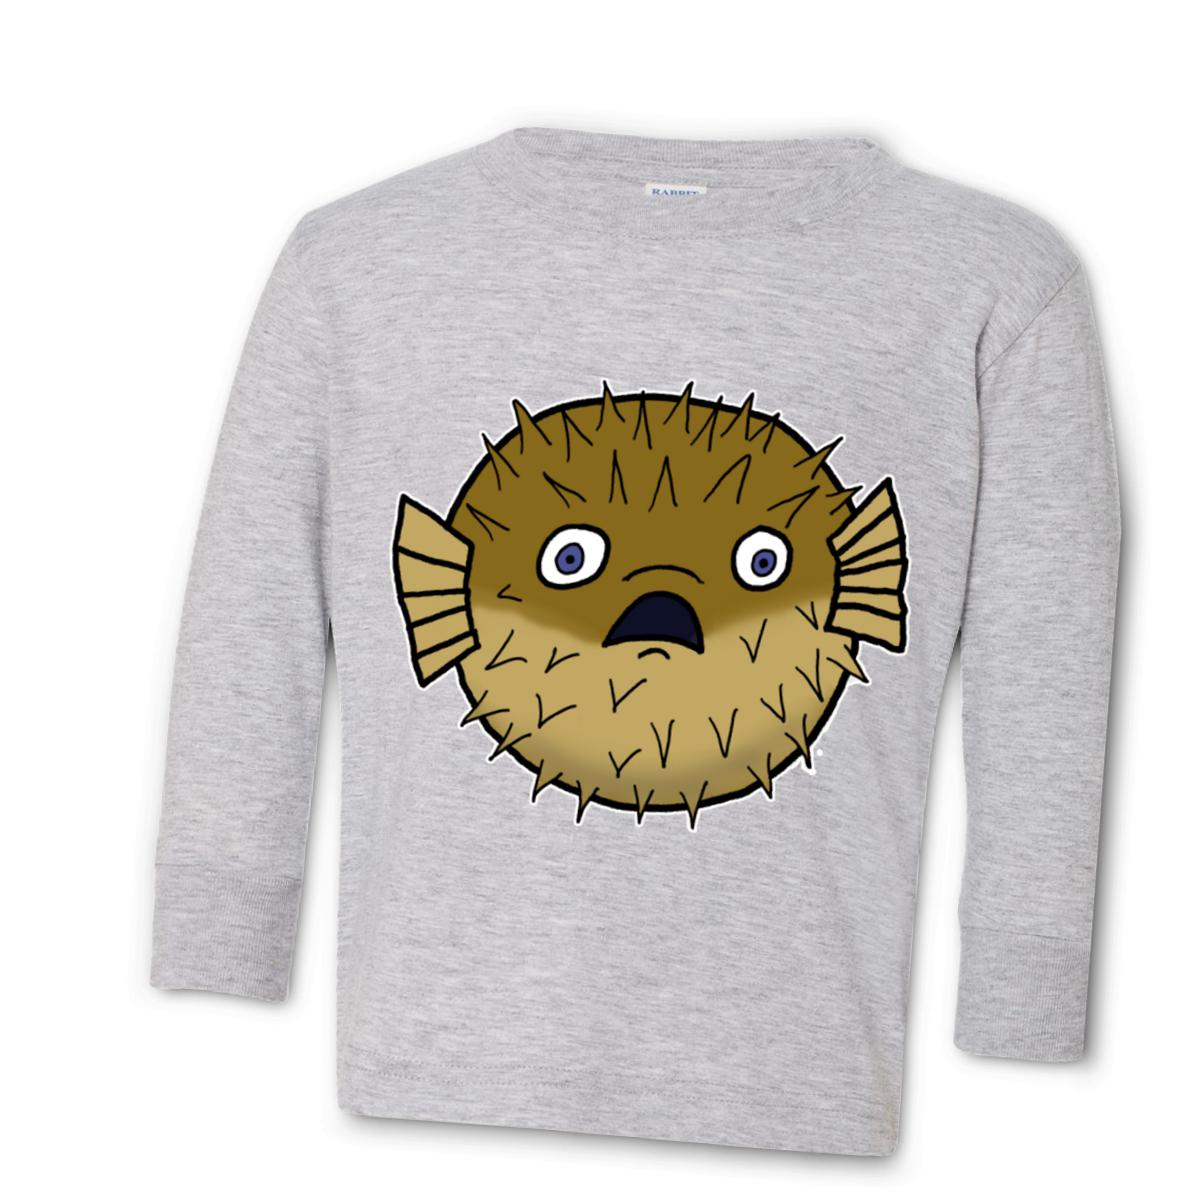 Puffer Fish Toddler Long Sleeve Tee 56T heather